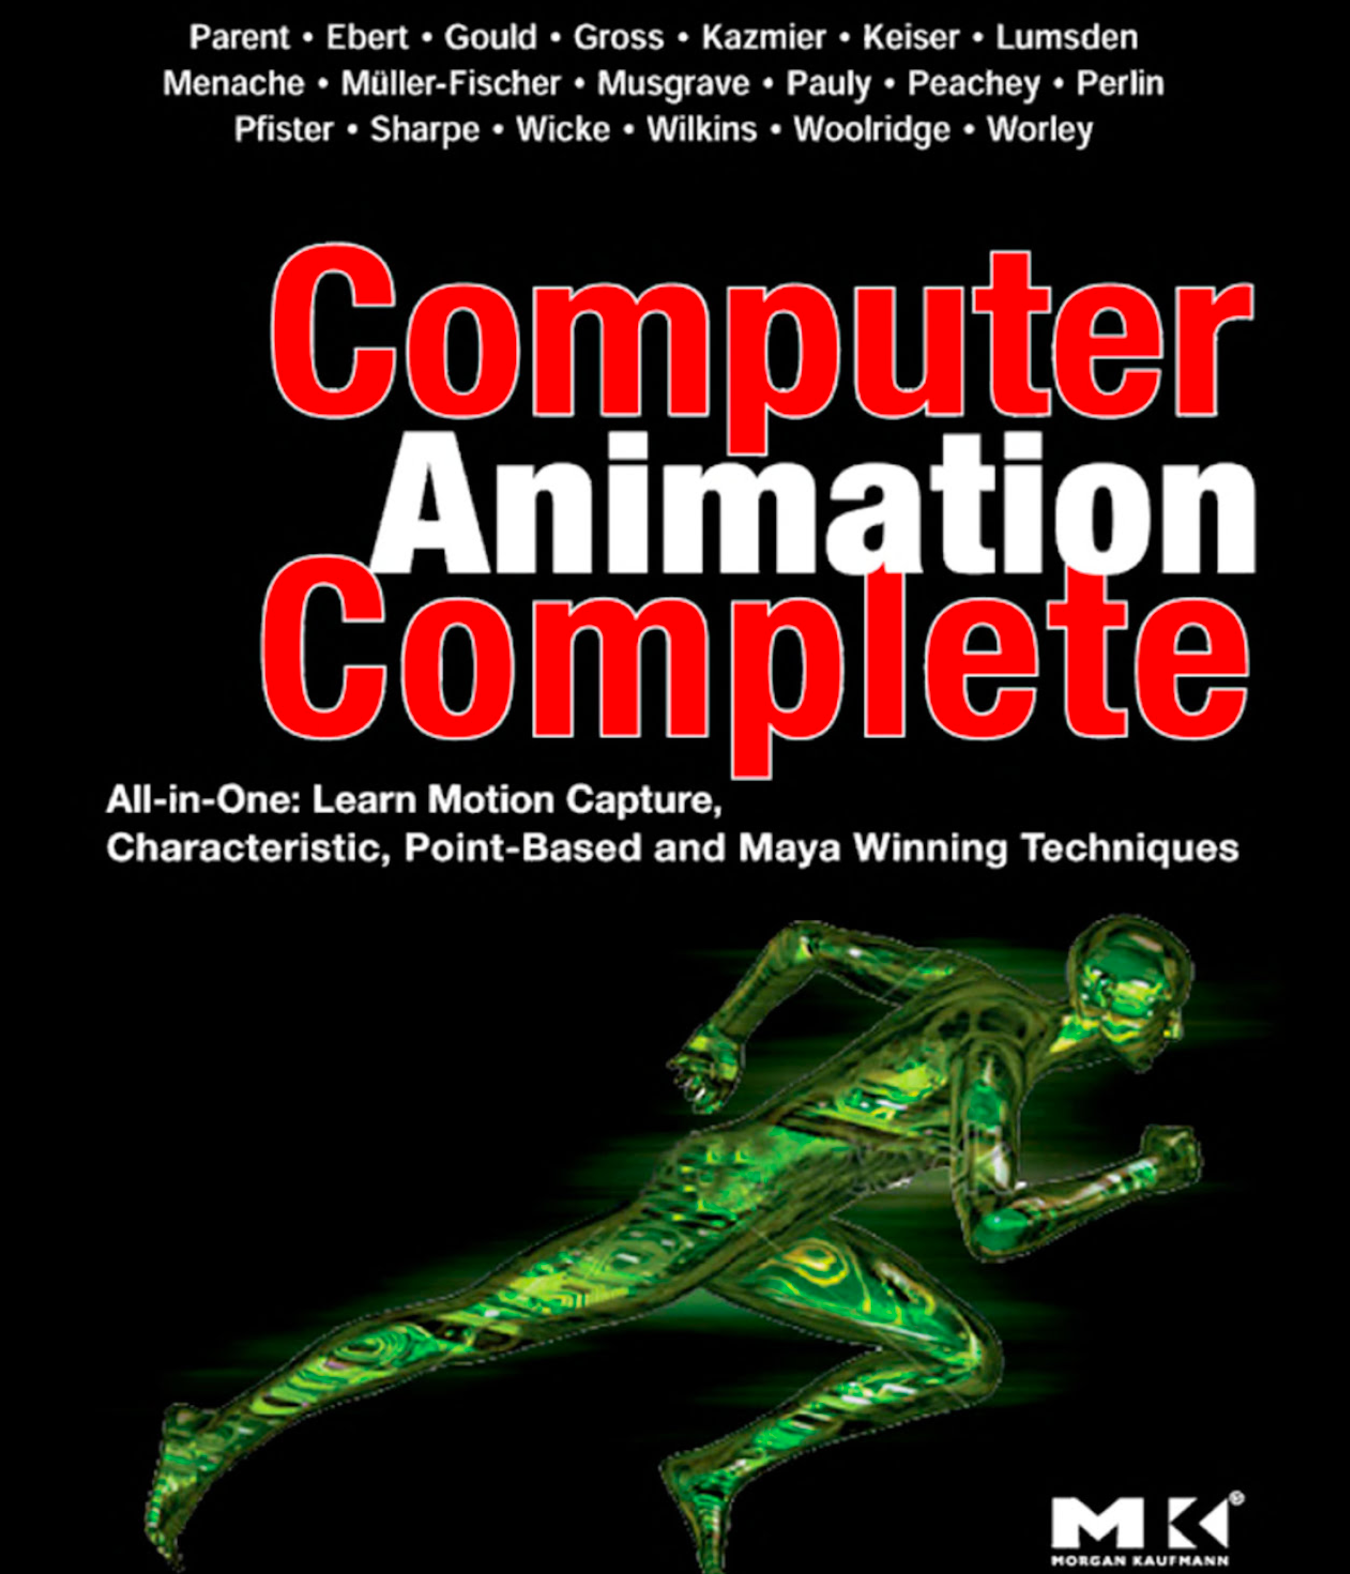 Computer animation complete: all-in-one: learn motion capture, characteristic, point-based, and Maya winning techniques